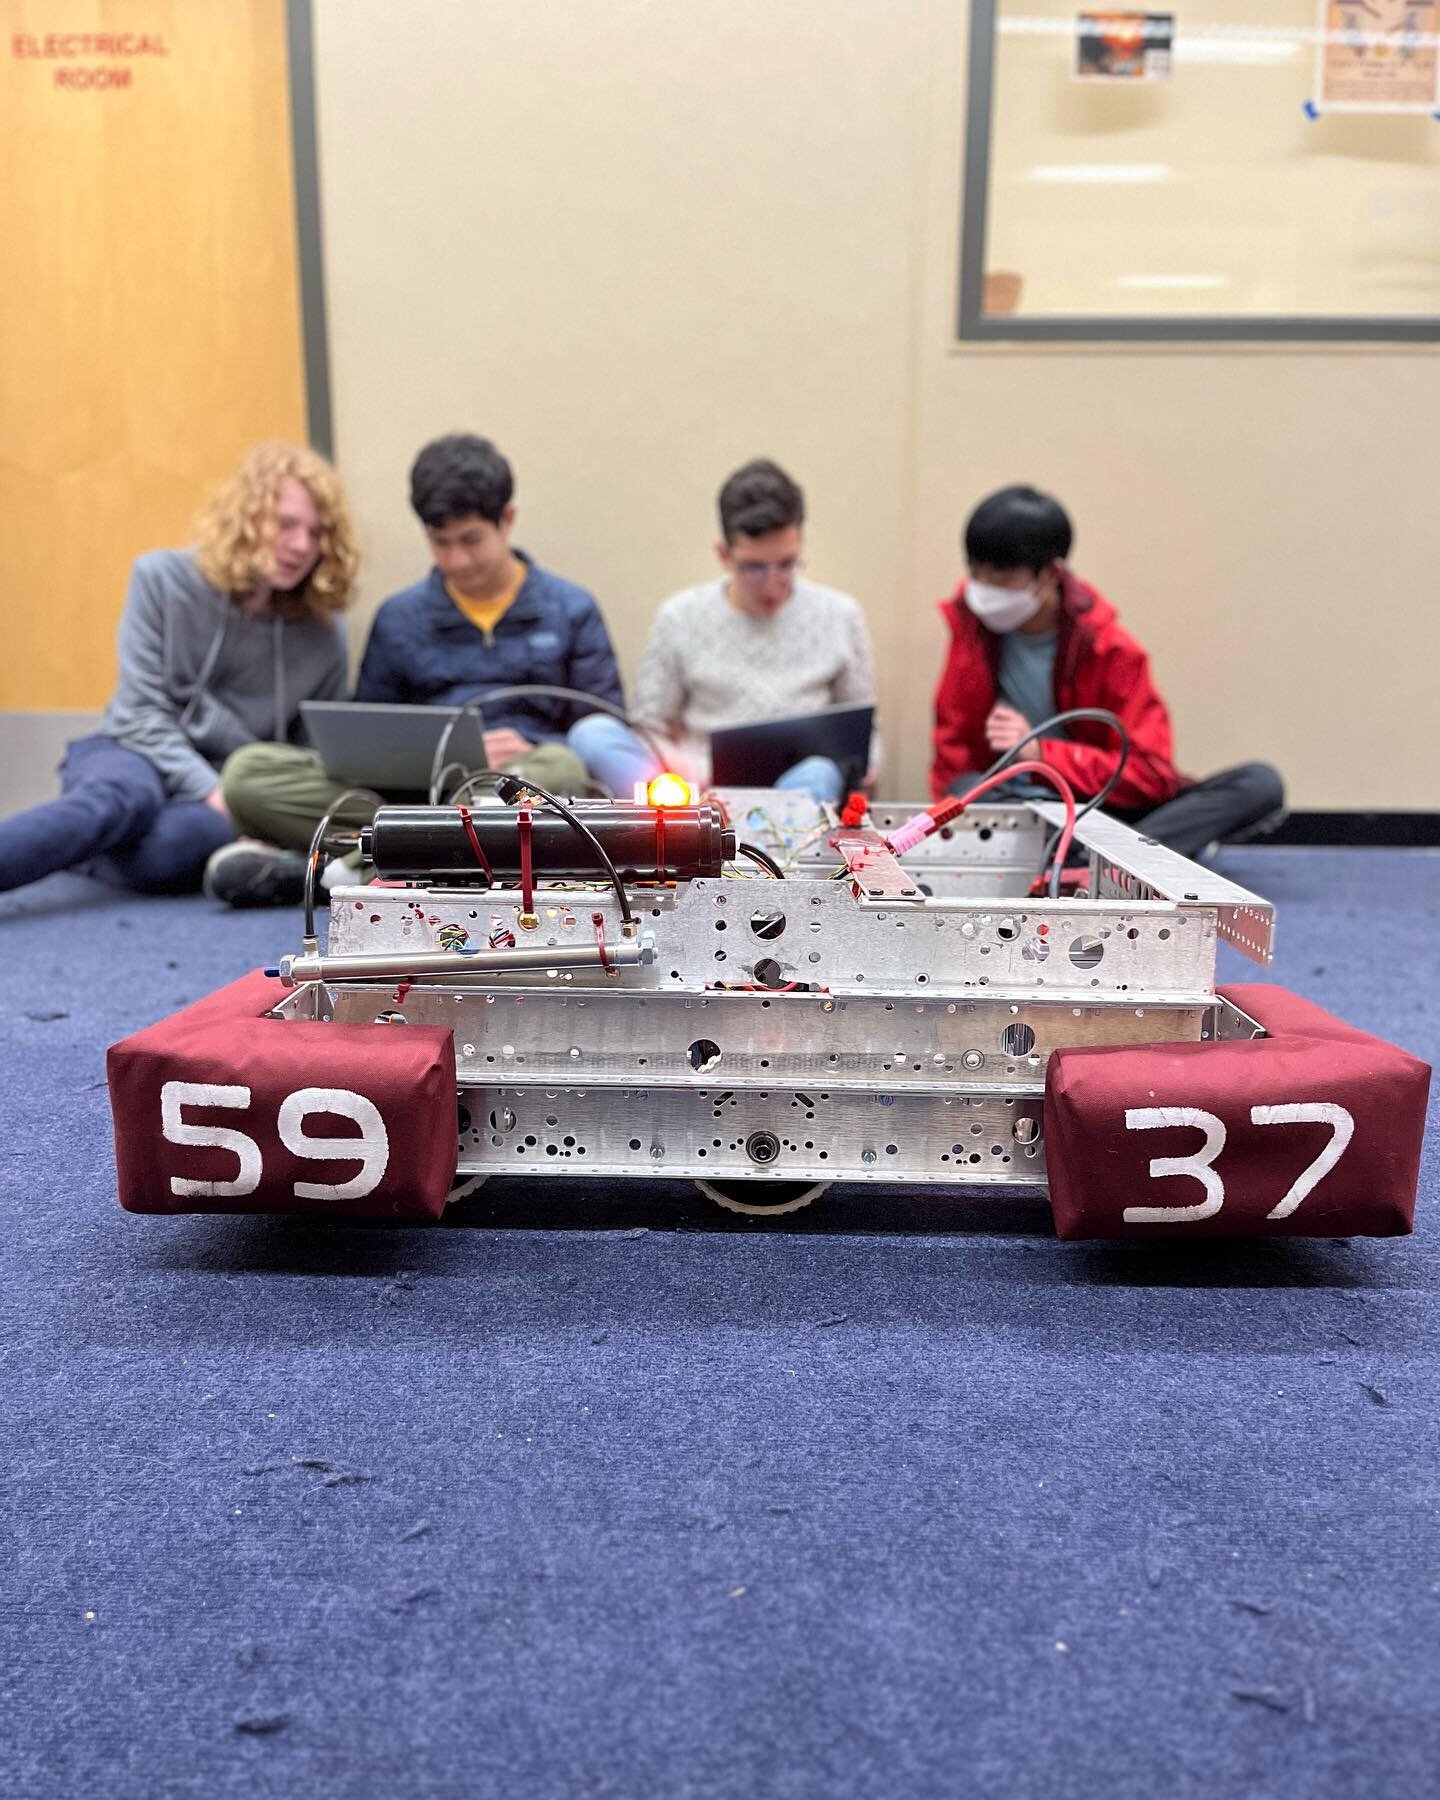 This week has been very productive. We were able to finish our base and our elevator!!! 
Thanks to @nrg_948 we were able to program some autonomous code for our practice bot! 
We are going to keep running at full speed ahead! Can&rsquo;t wait for com